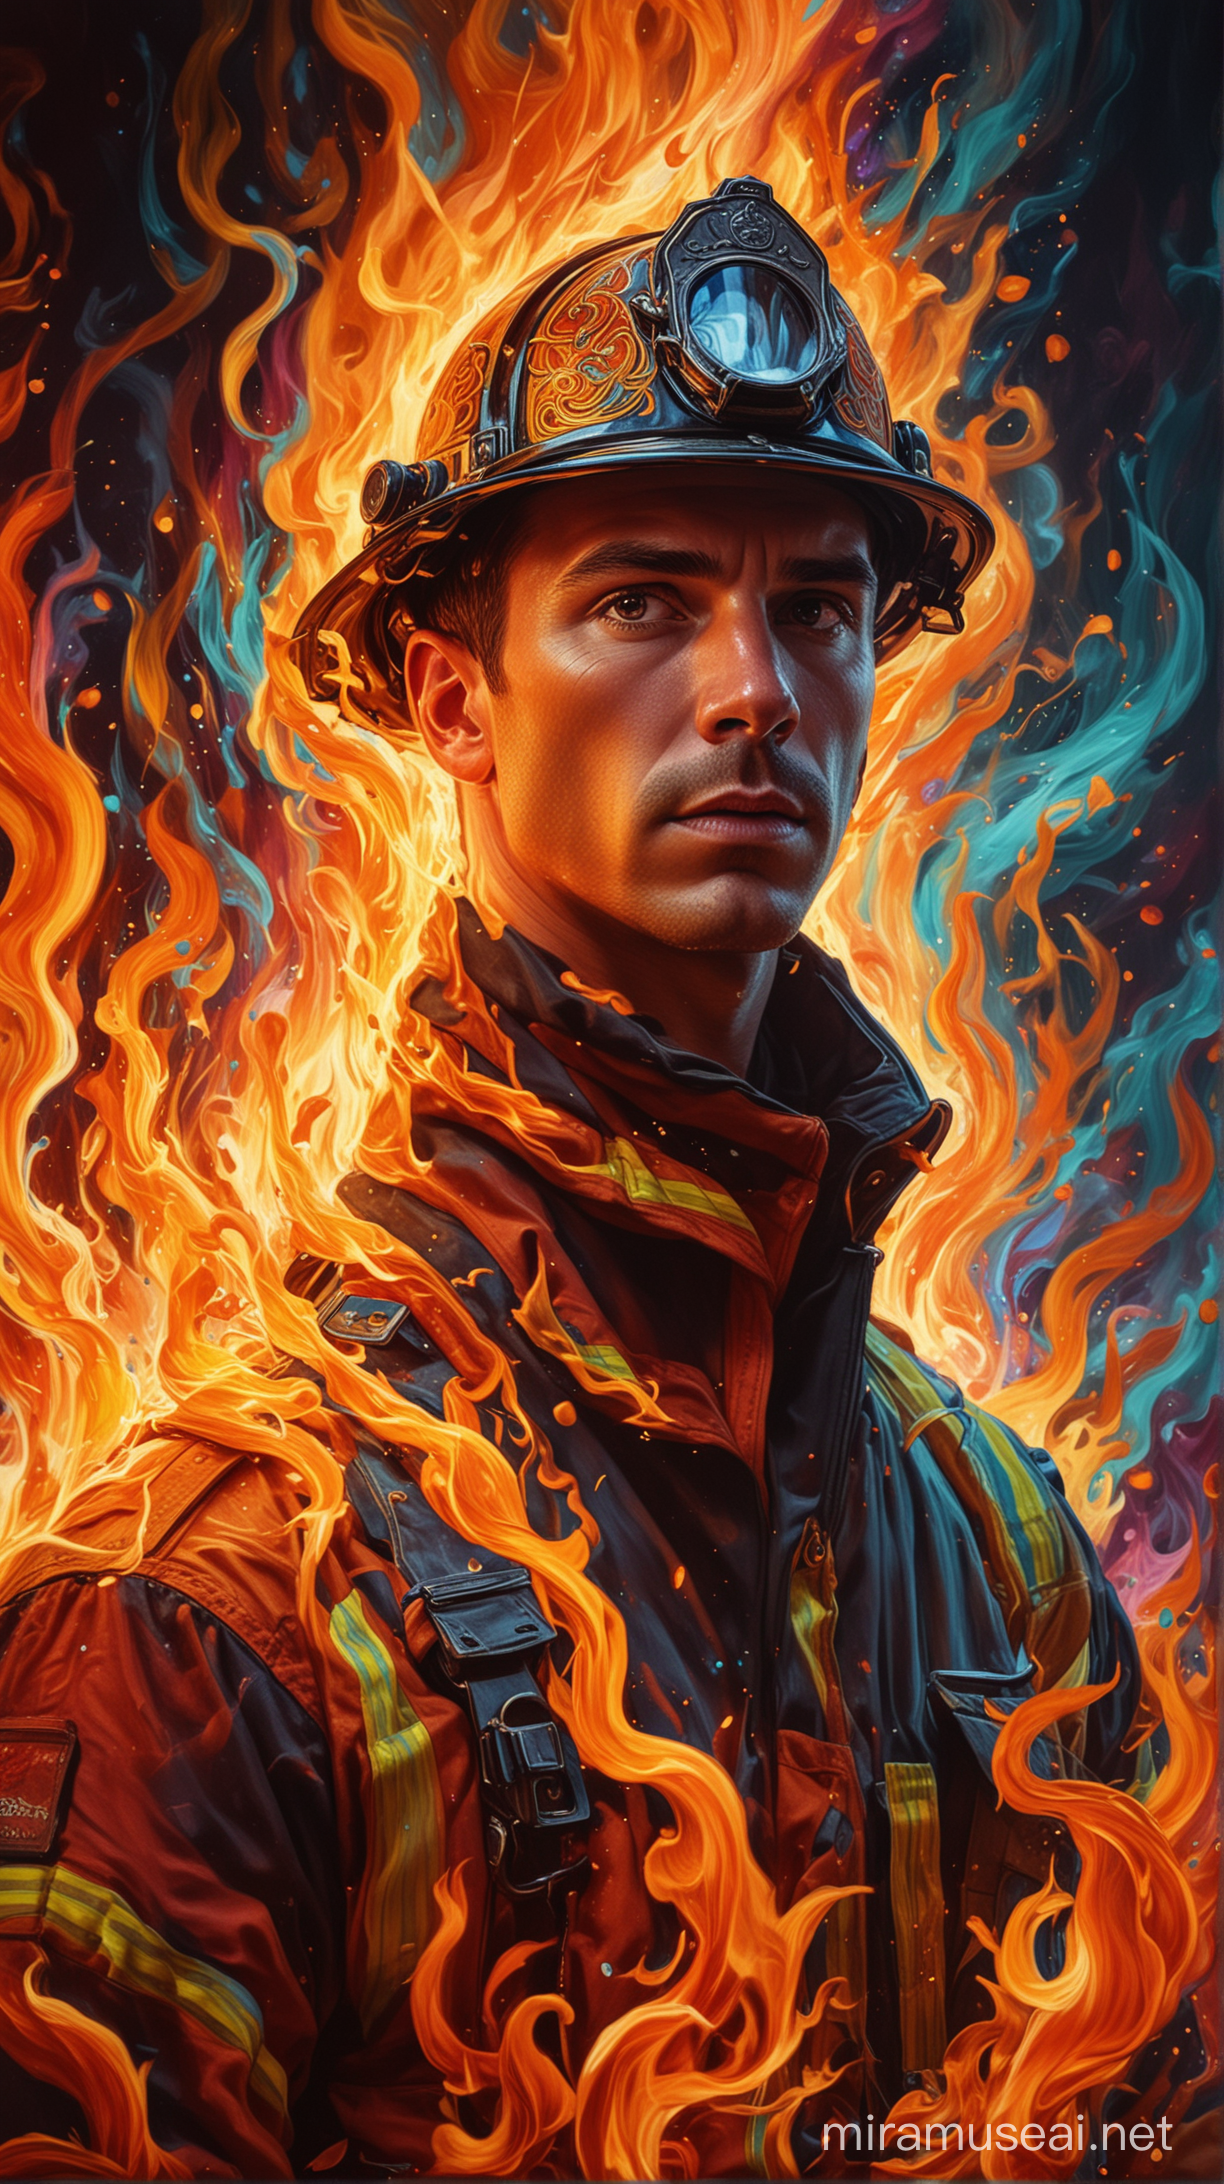 A psychedelic portrait of a fireman, dressed in full uniform, looking into the depths of a vibrant, swirling flame, capture his brave and determined expression in a dreamlike setting. The background is a mesmerizing psychedelic pattern of bright colors, illustrating the intensity and surrealism of his inner world as he grapples with the fierce flames. Place the focus on the fireman's face and the flames, maintaining a balance between reality and imagination.